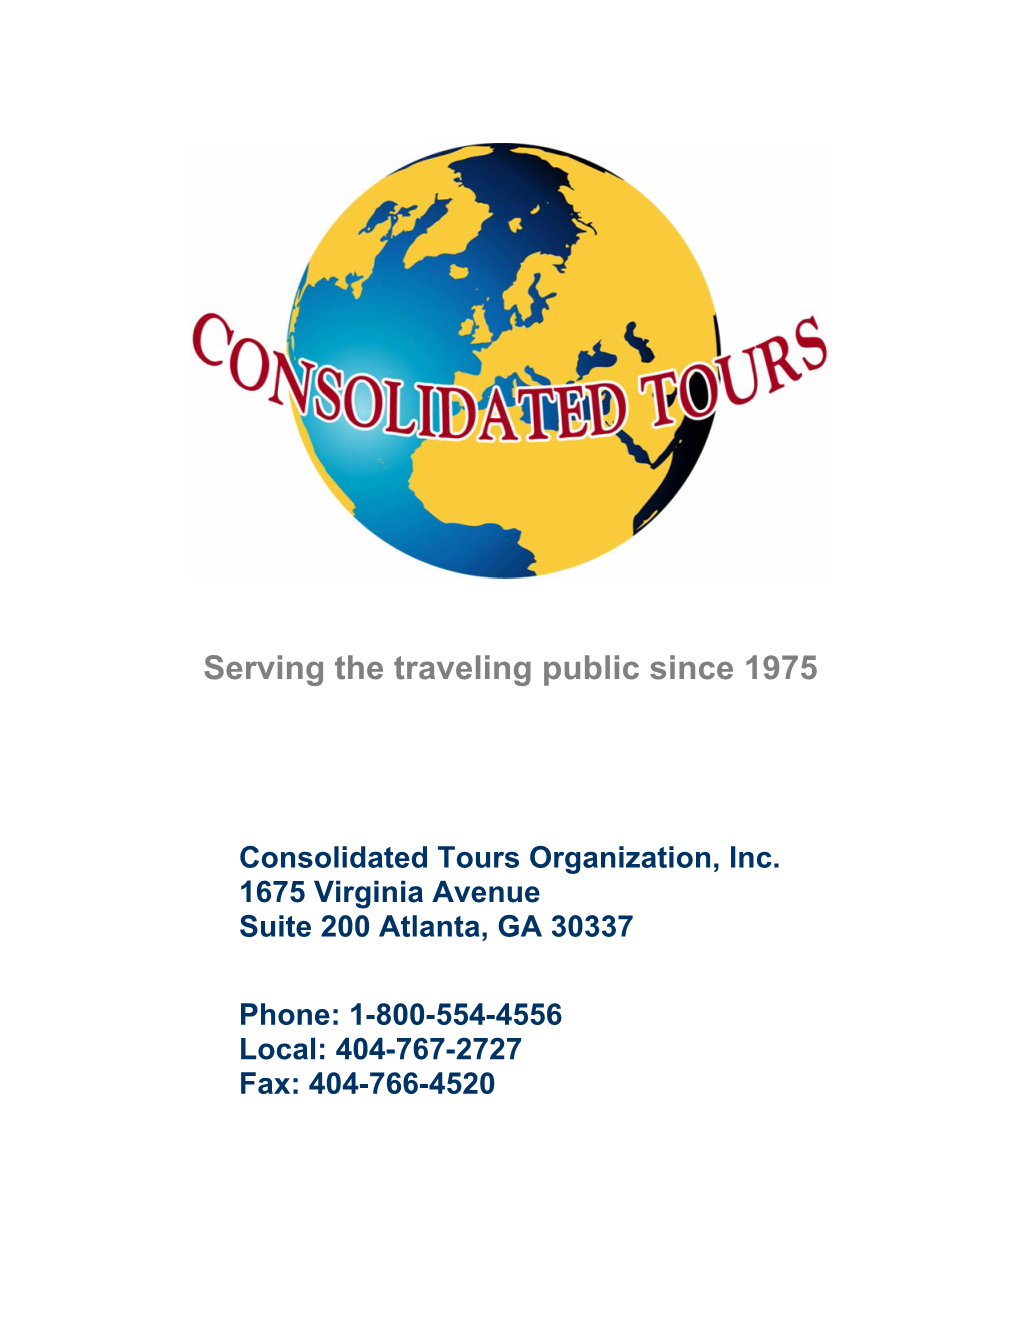 Serving the Traveling Public Since 1975